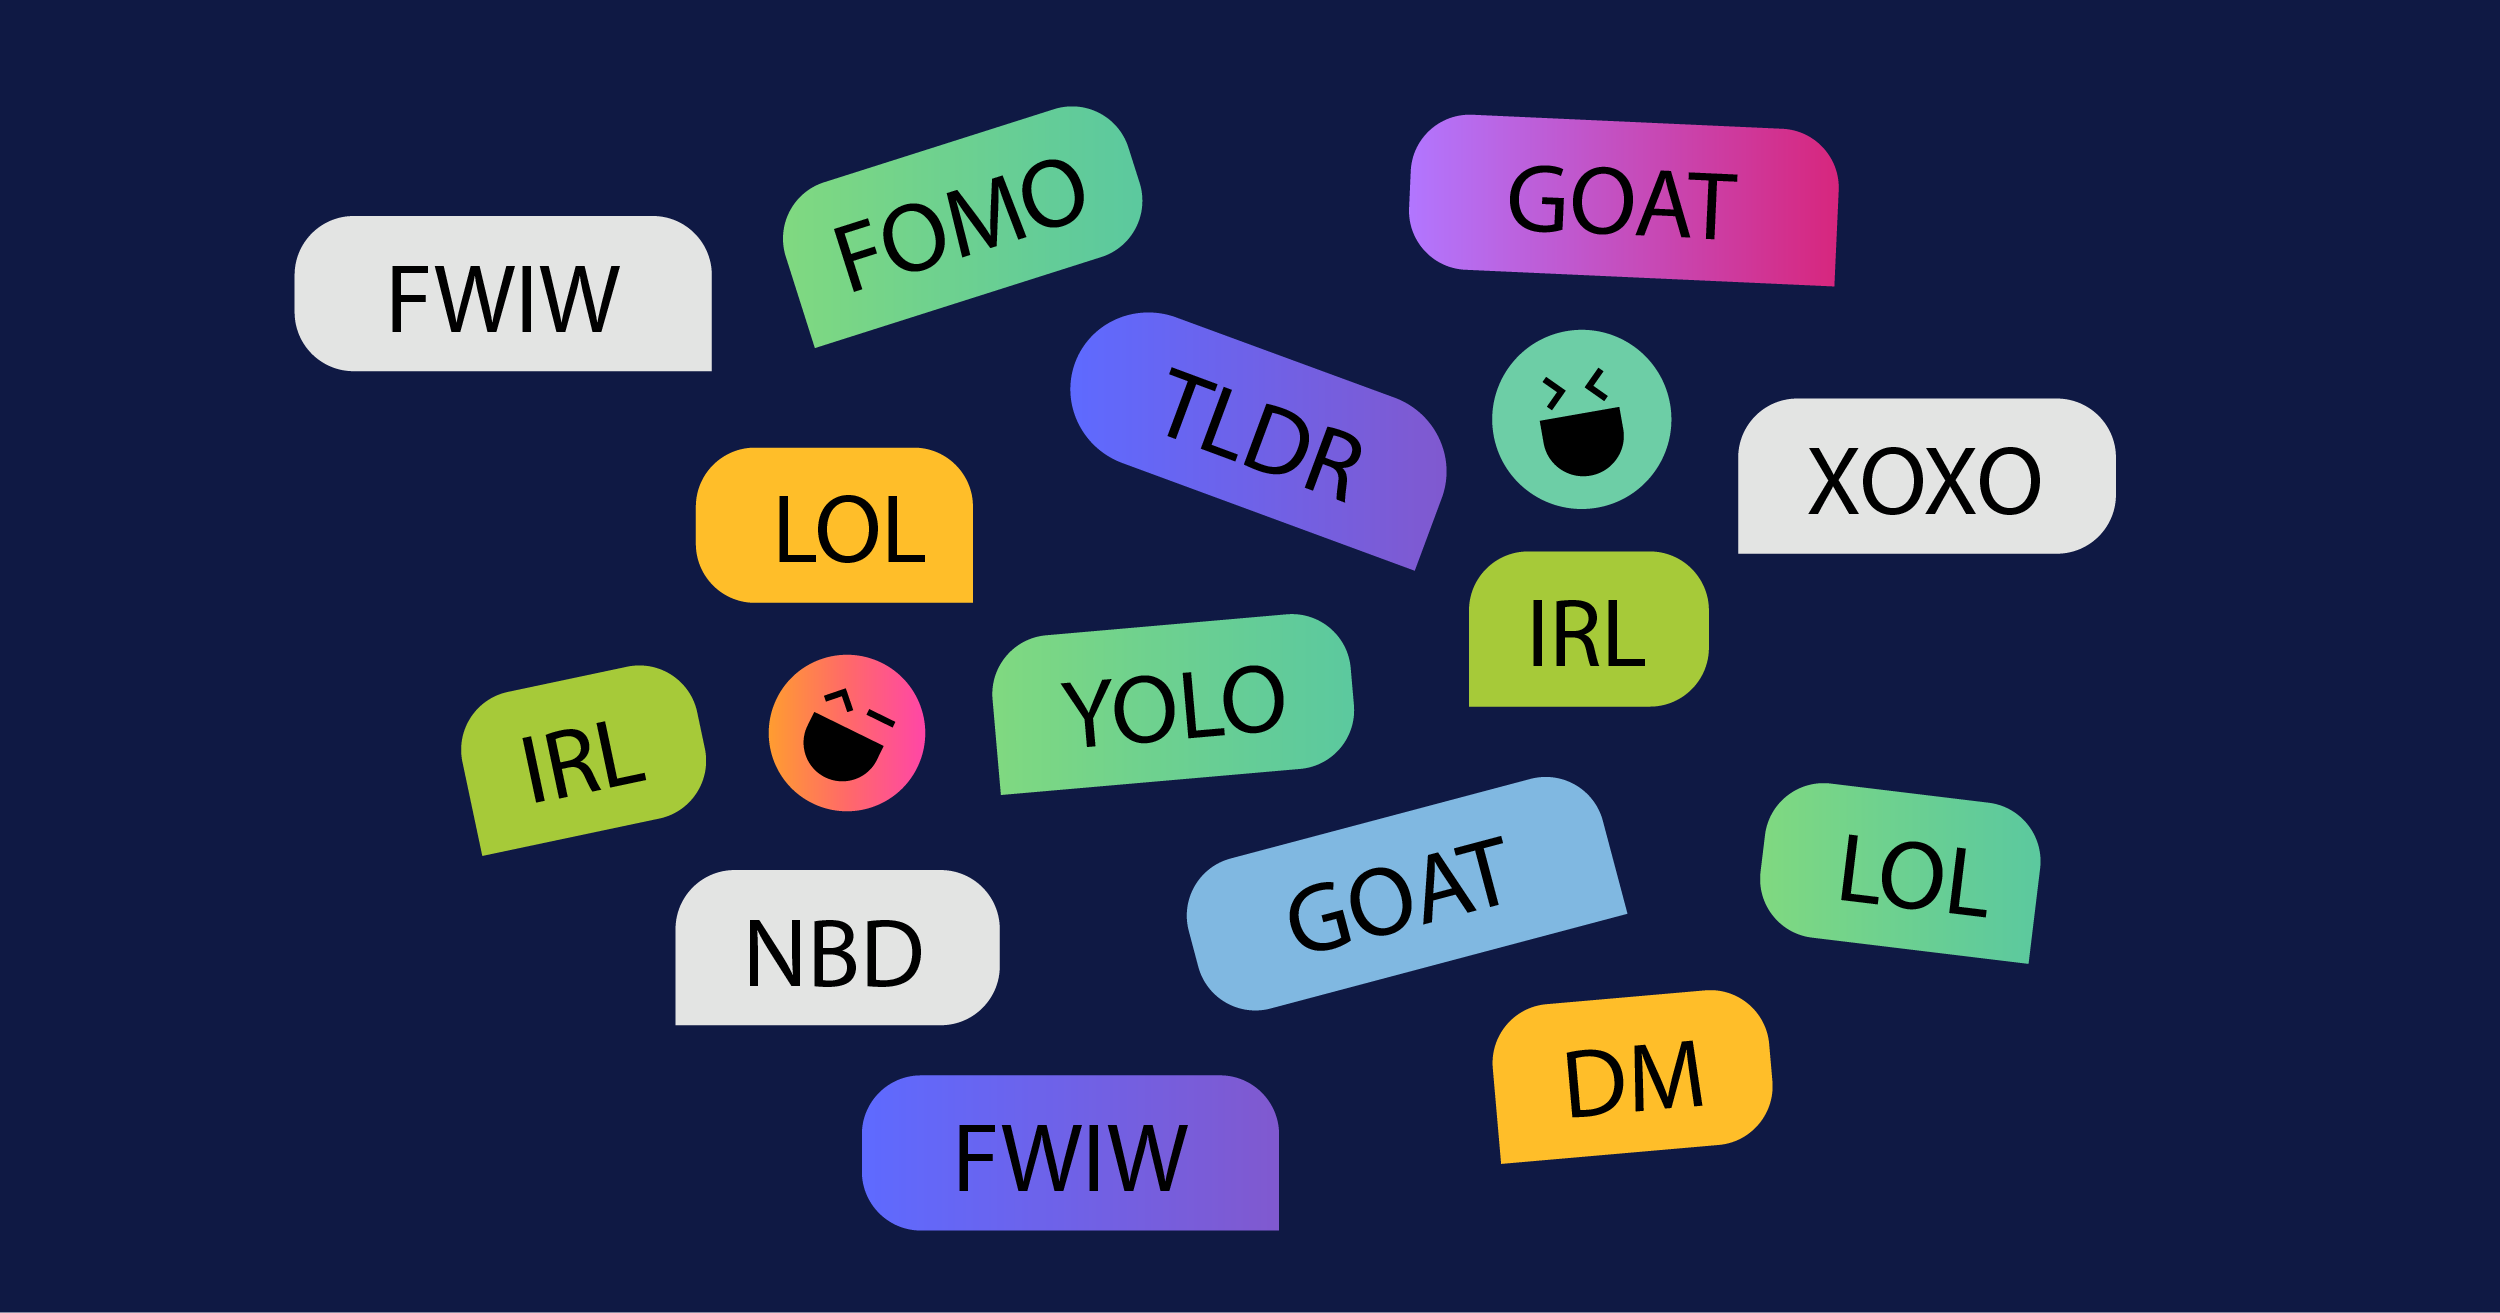 Text message abbreviations and acronyms